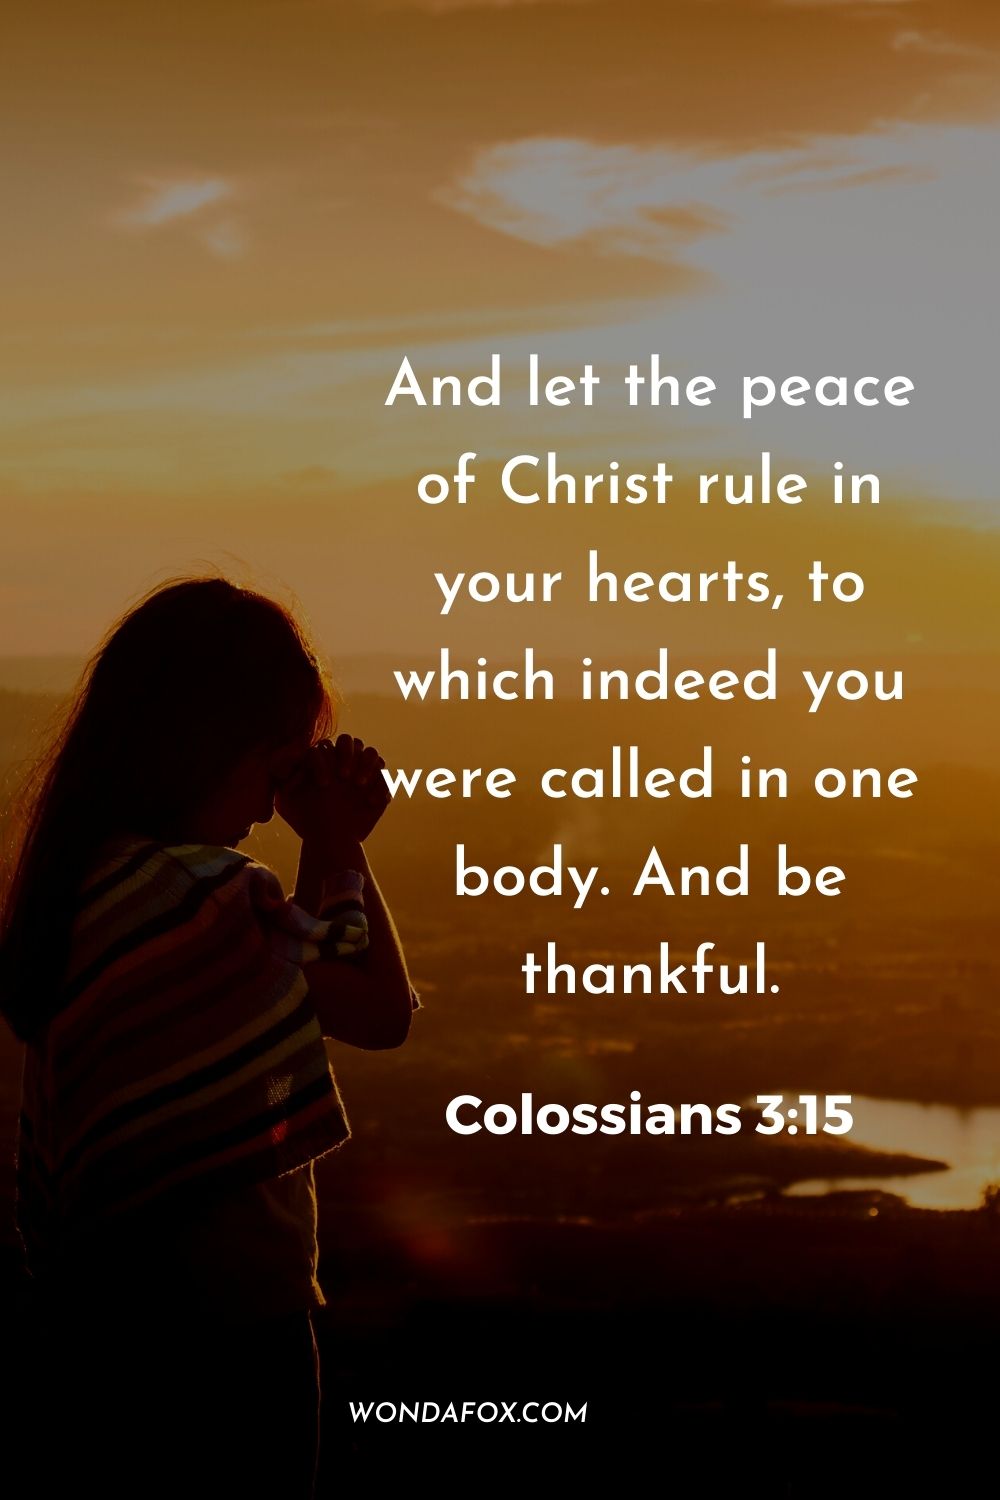 And let the peace of Christ rule in your hearts, to which indeed you were called in one body. And be thankful. Colossians 3:15